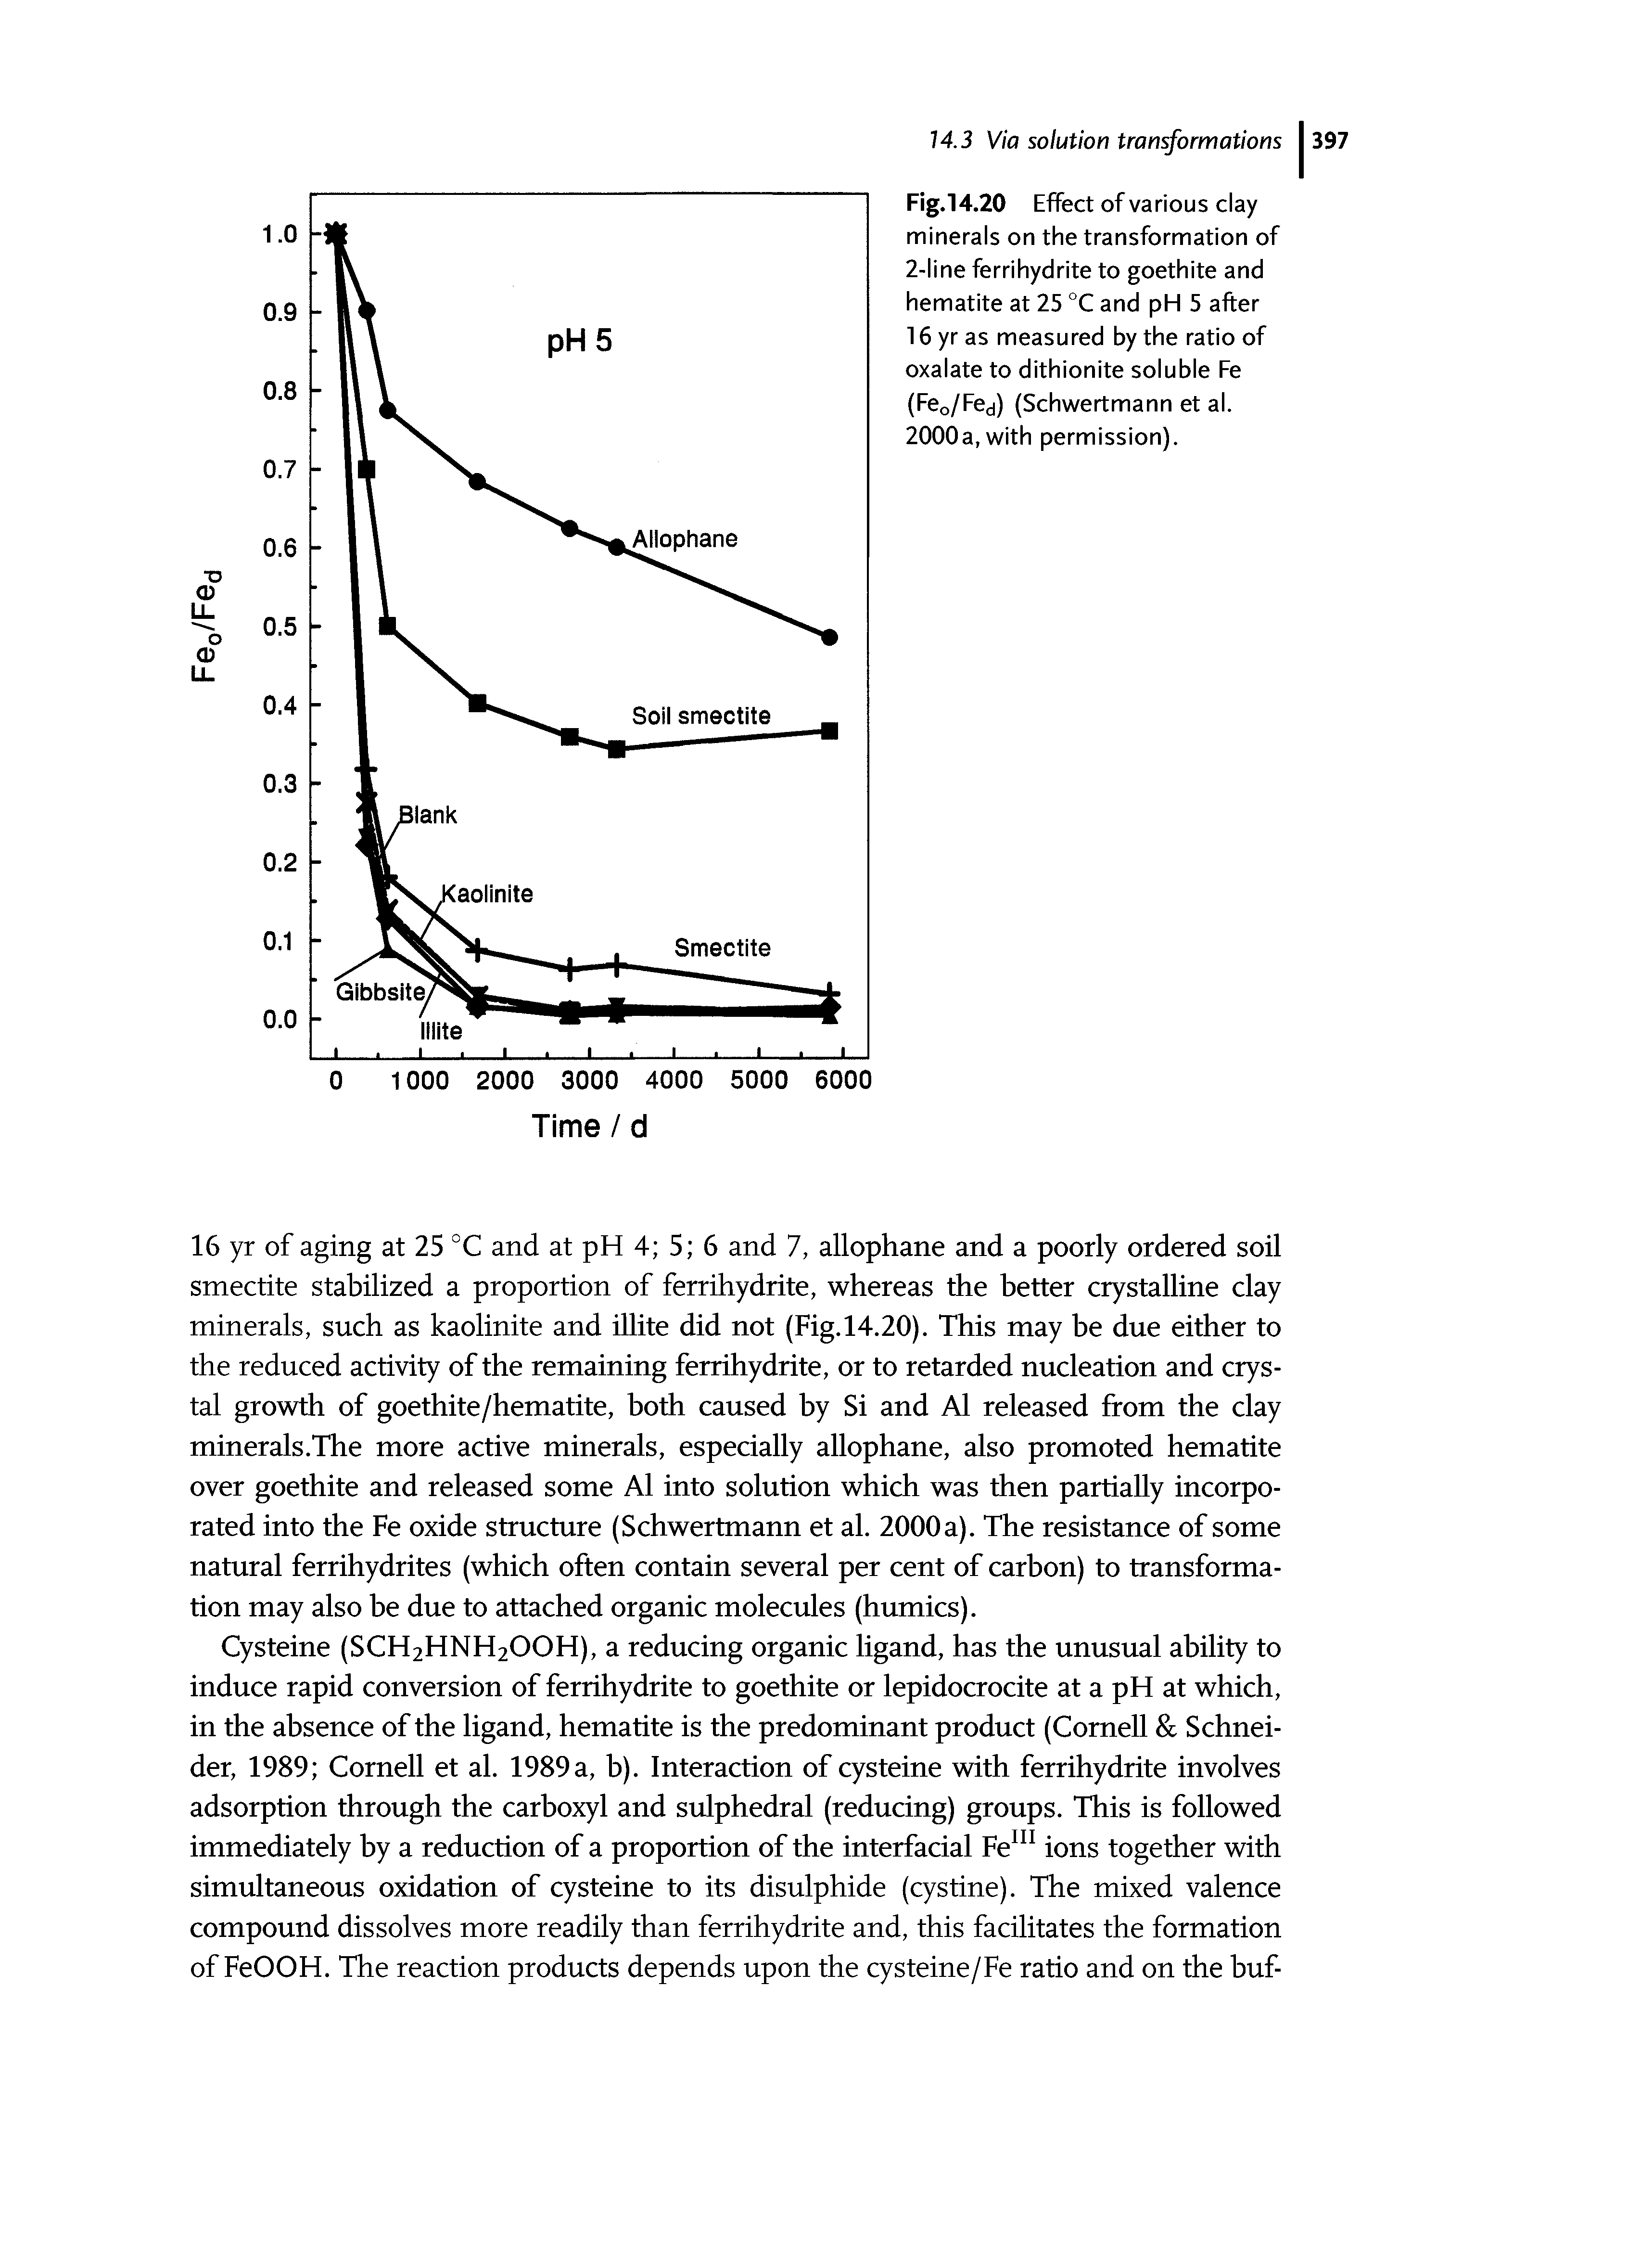 Fig.14.20 Effect of various clay minerals on the transformation of 2-line ferrihydrite to goethite and hematite at 25 °C and pH 5 after 16 yr as measured by the ratio of oxalate to dithionite soluble Fe (Feo/Fed) (Schwertmann et al.